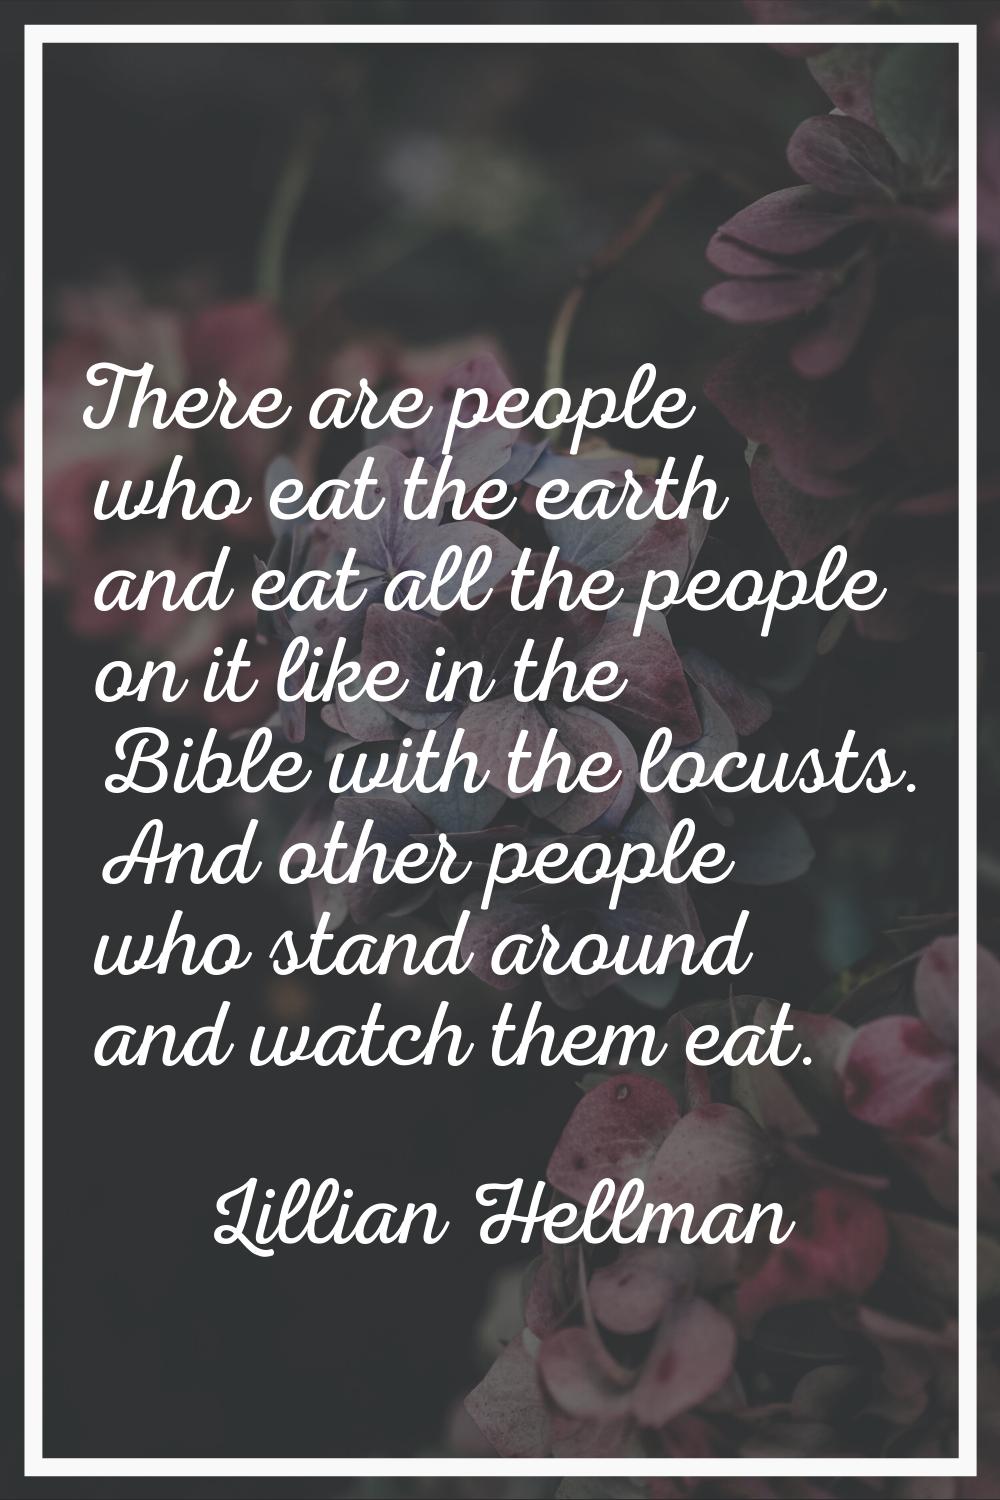 There are people who eat the earth and eat all the people on it like in the Bible with the locusts.